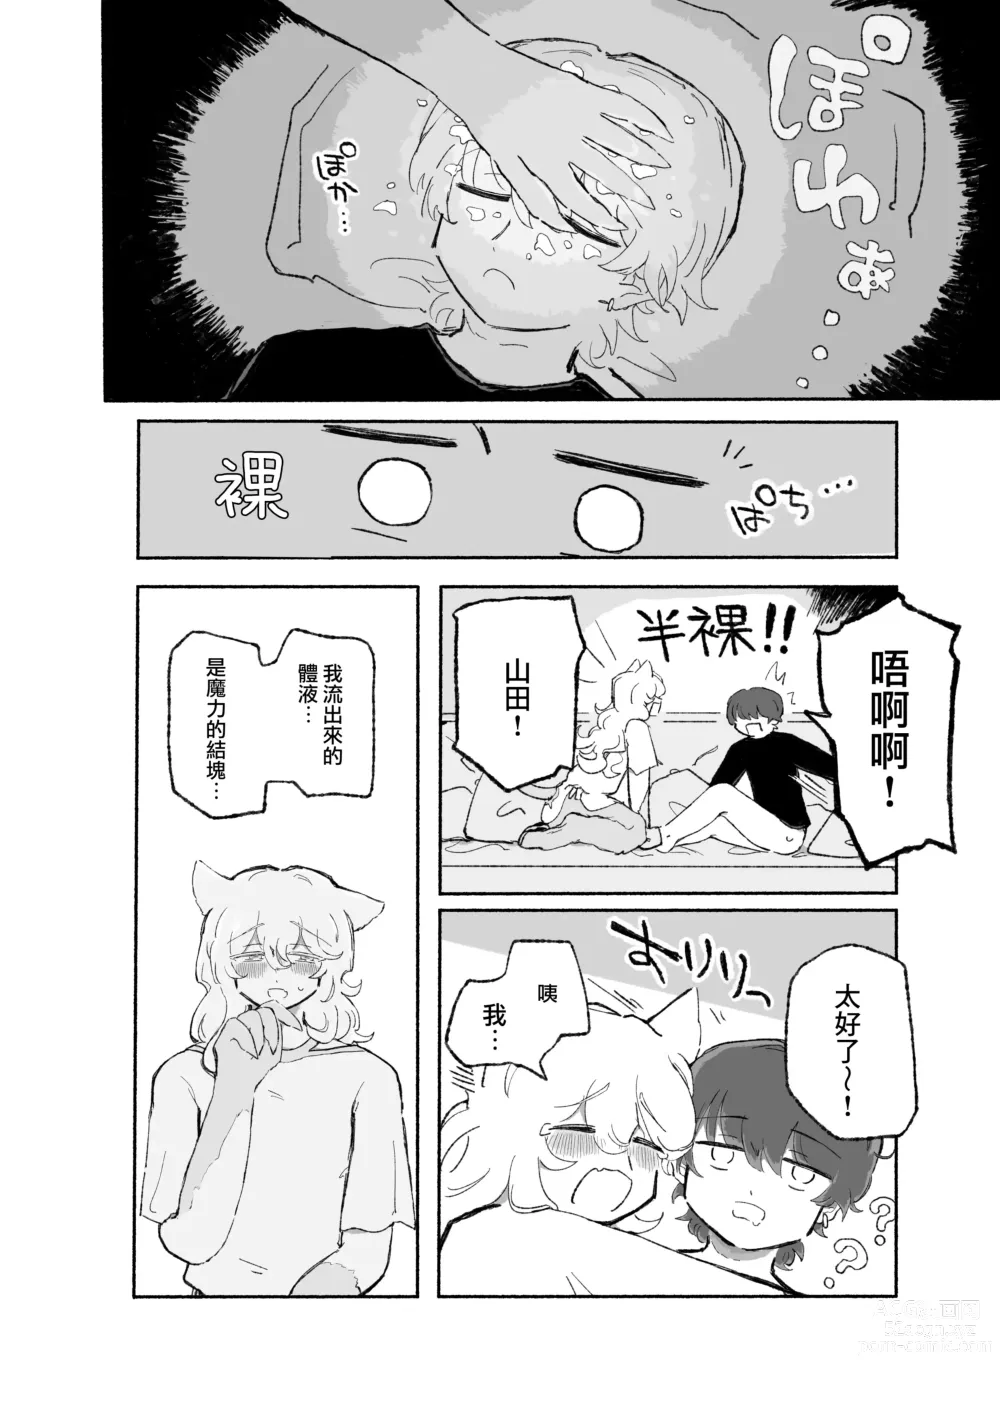 Page 24 of doujinshi 零之惡魔